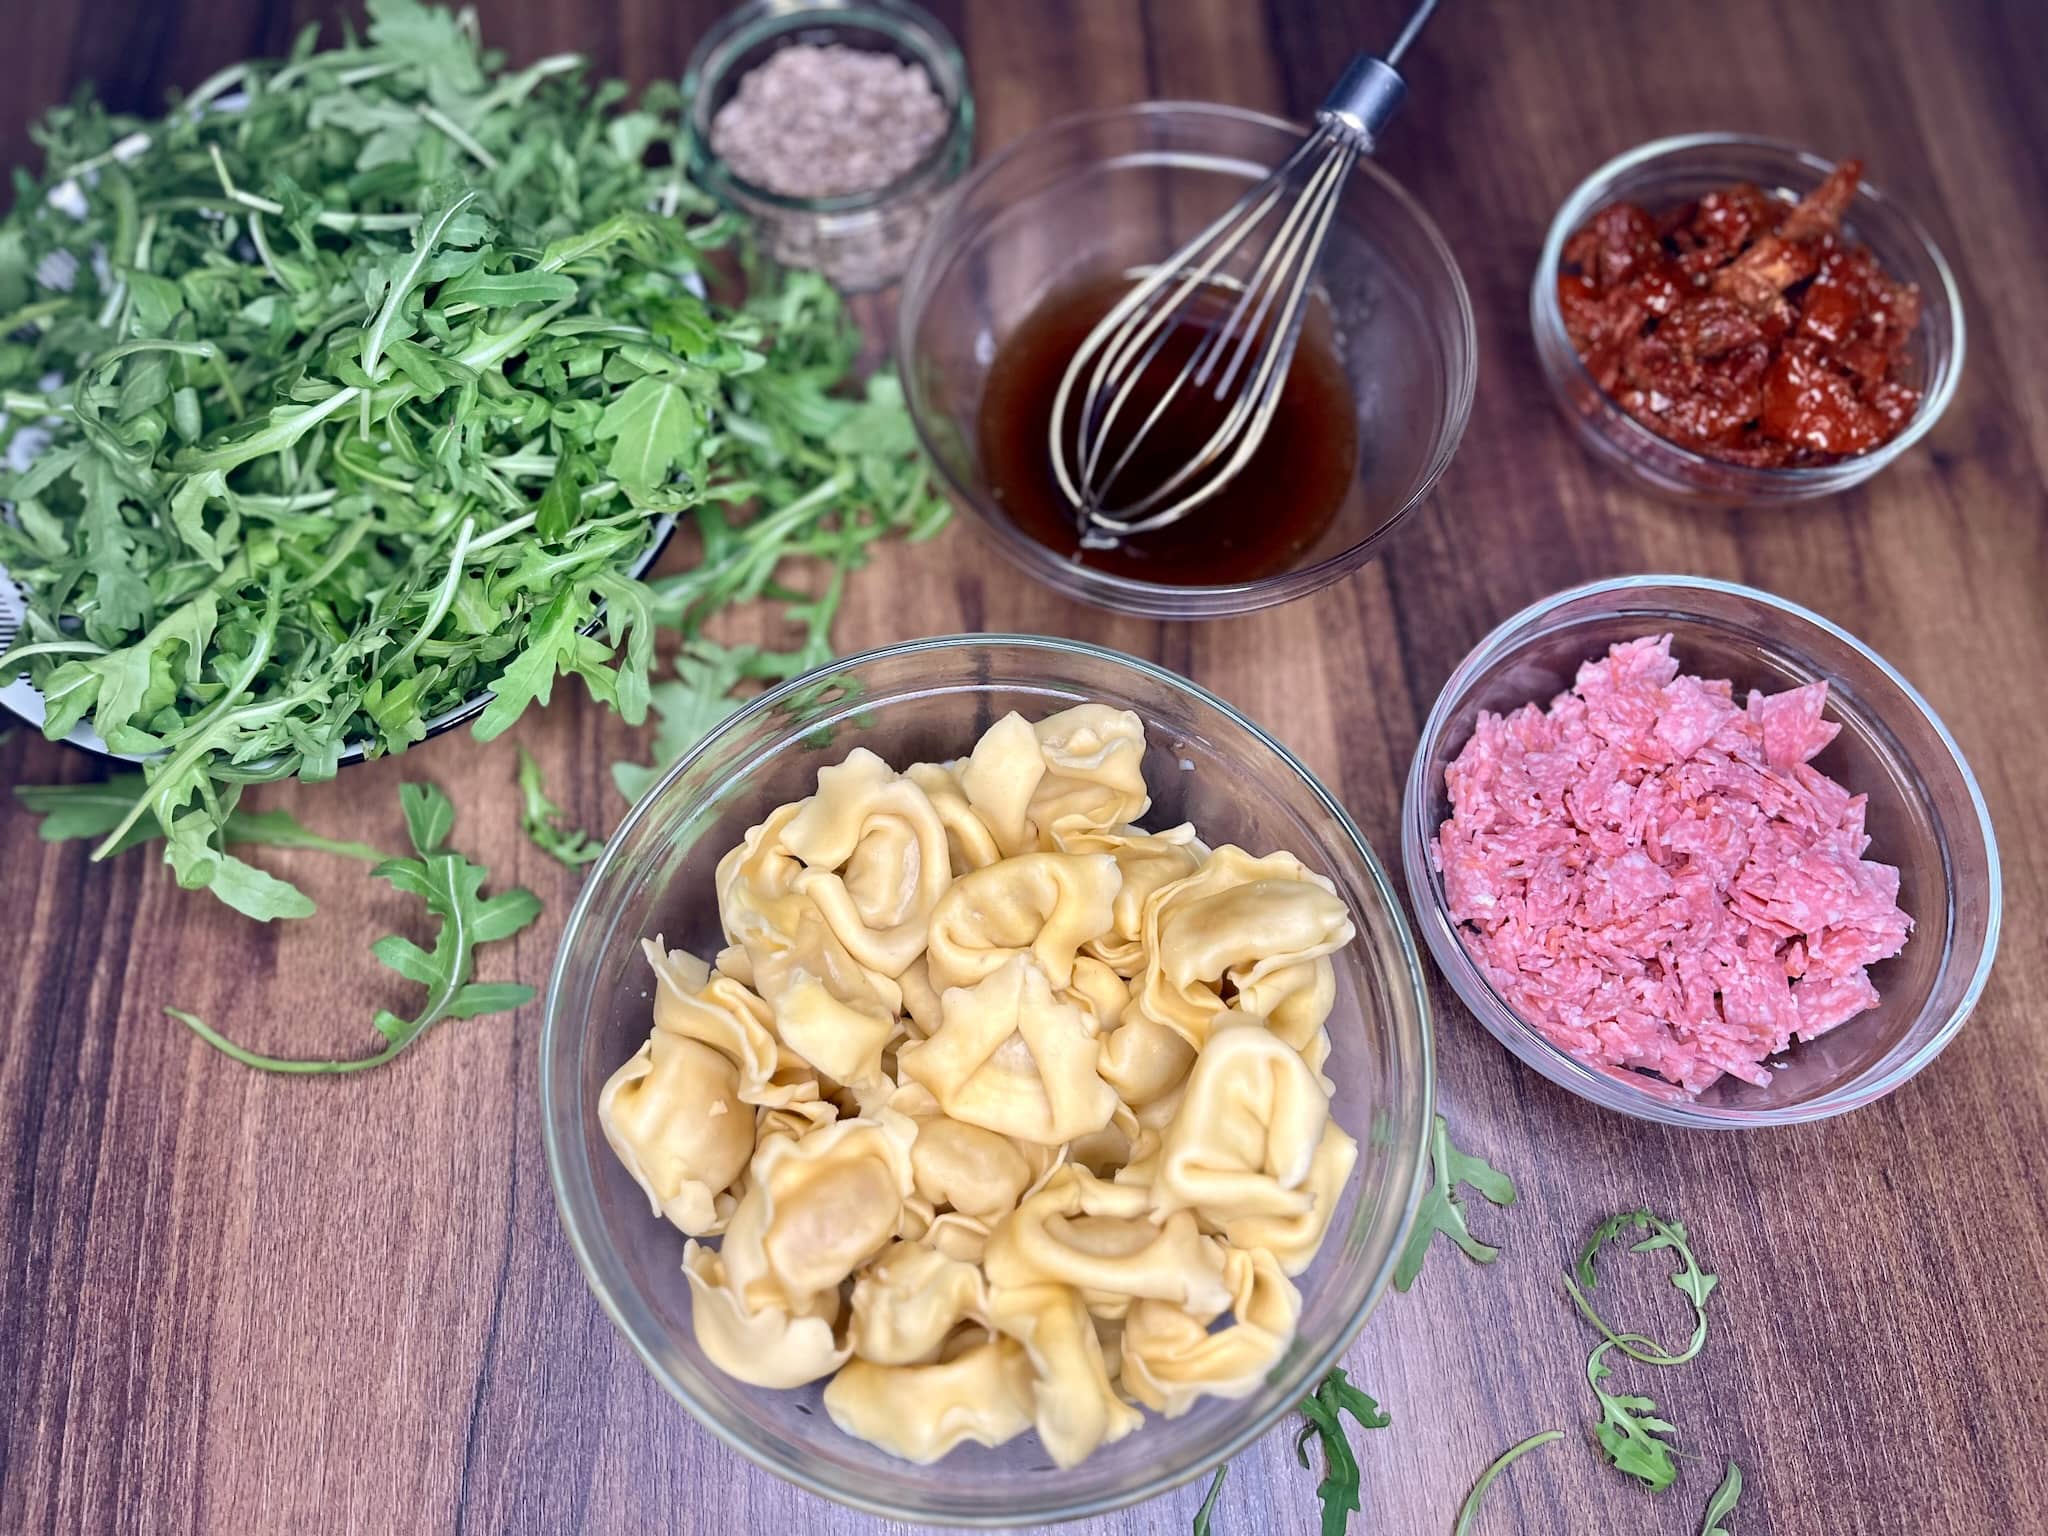 All the ingredients on a tabletop ready to make Tortellini Salad